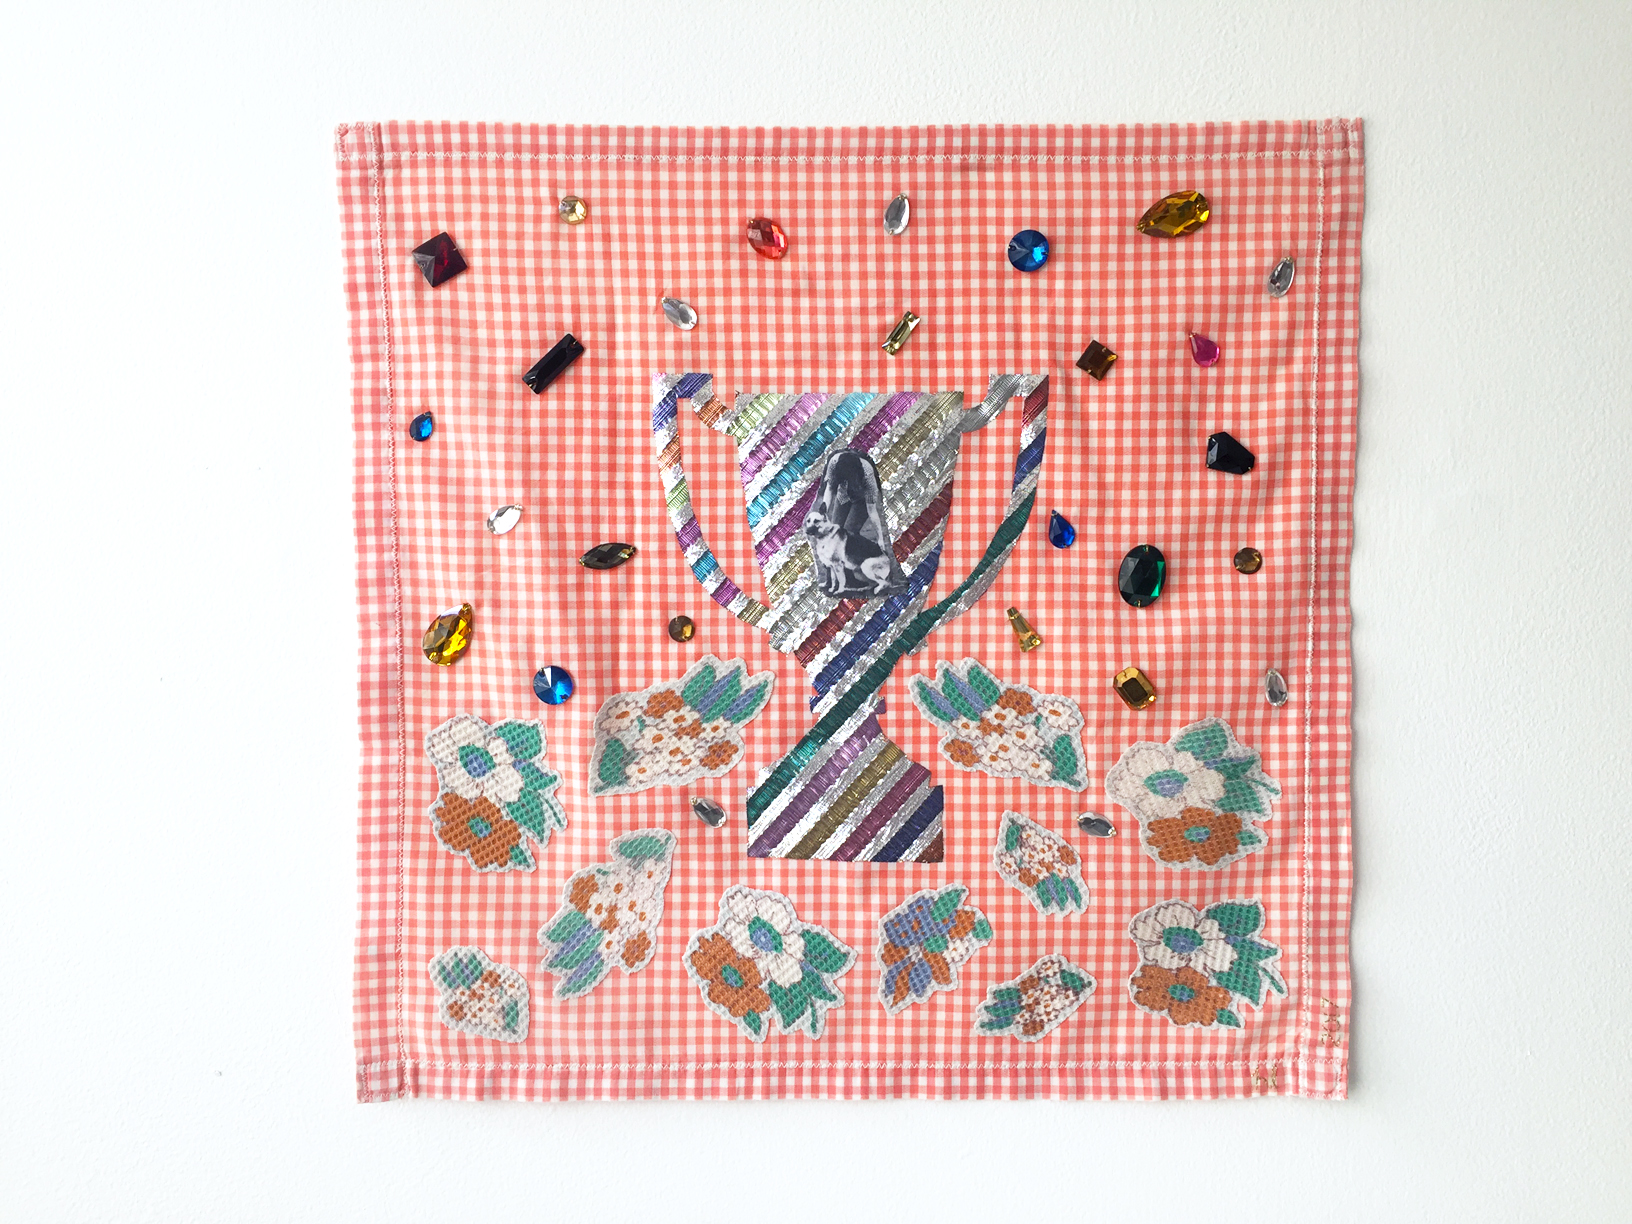 Number 1 Best Friend #2, 2017, textile object, found fabric on handmade cotton placemat, digital print on cotton, polyester, found plastic gems, 390mm x 385mm